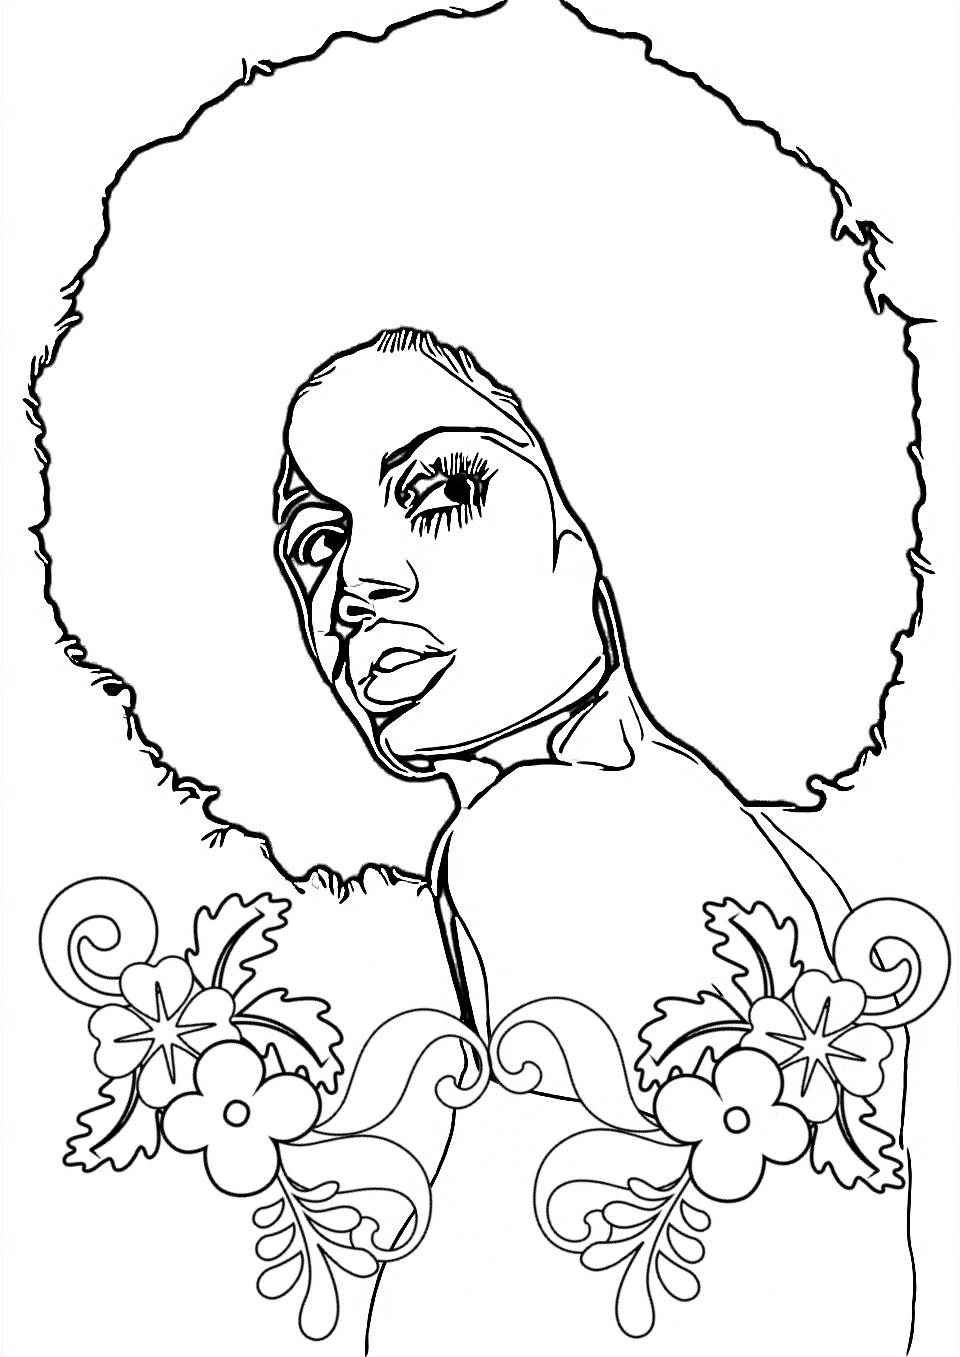 Glorious Afro, Beautiful Woman Coloring Page